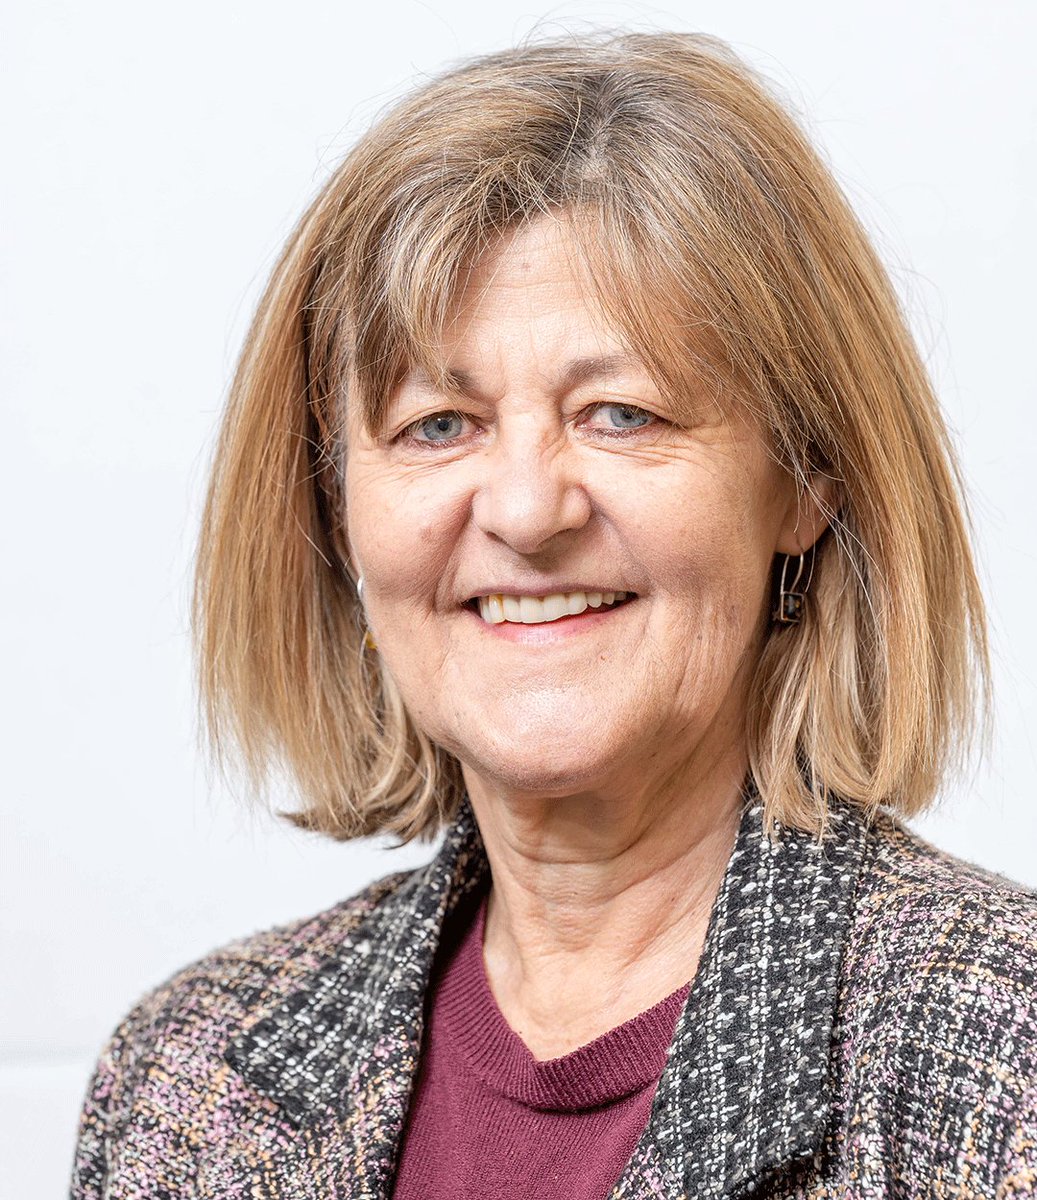 Last night at Broadland District Council’s AGM, Cllr Sue Holland was elected as the Leader of the Council for her second year. Find out more at: ow.ly/fItl50RTO0Q